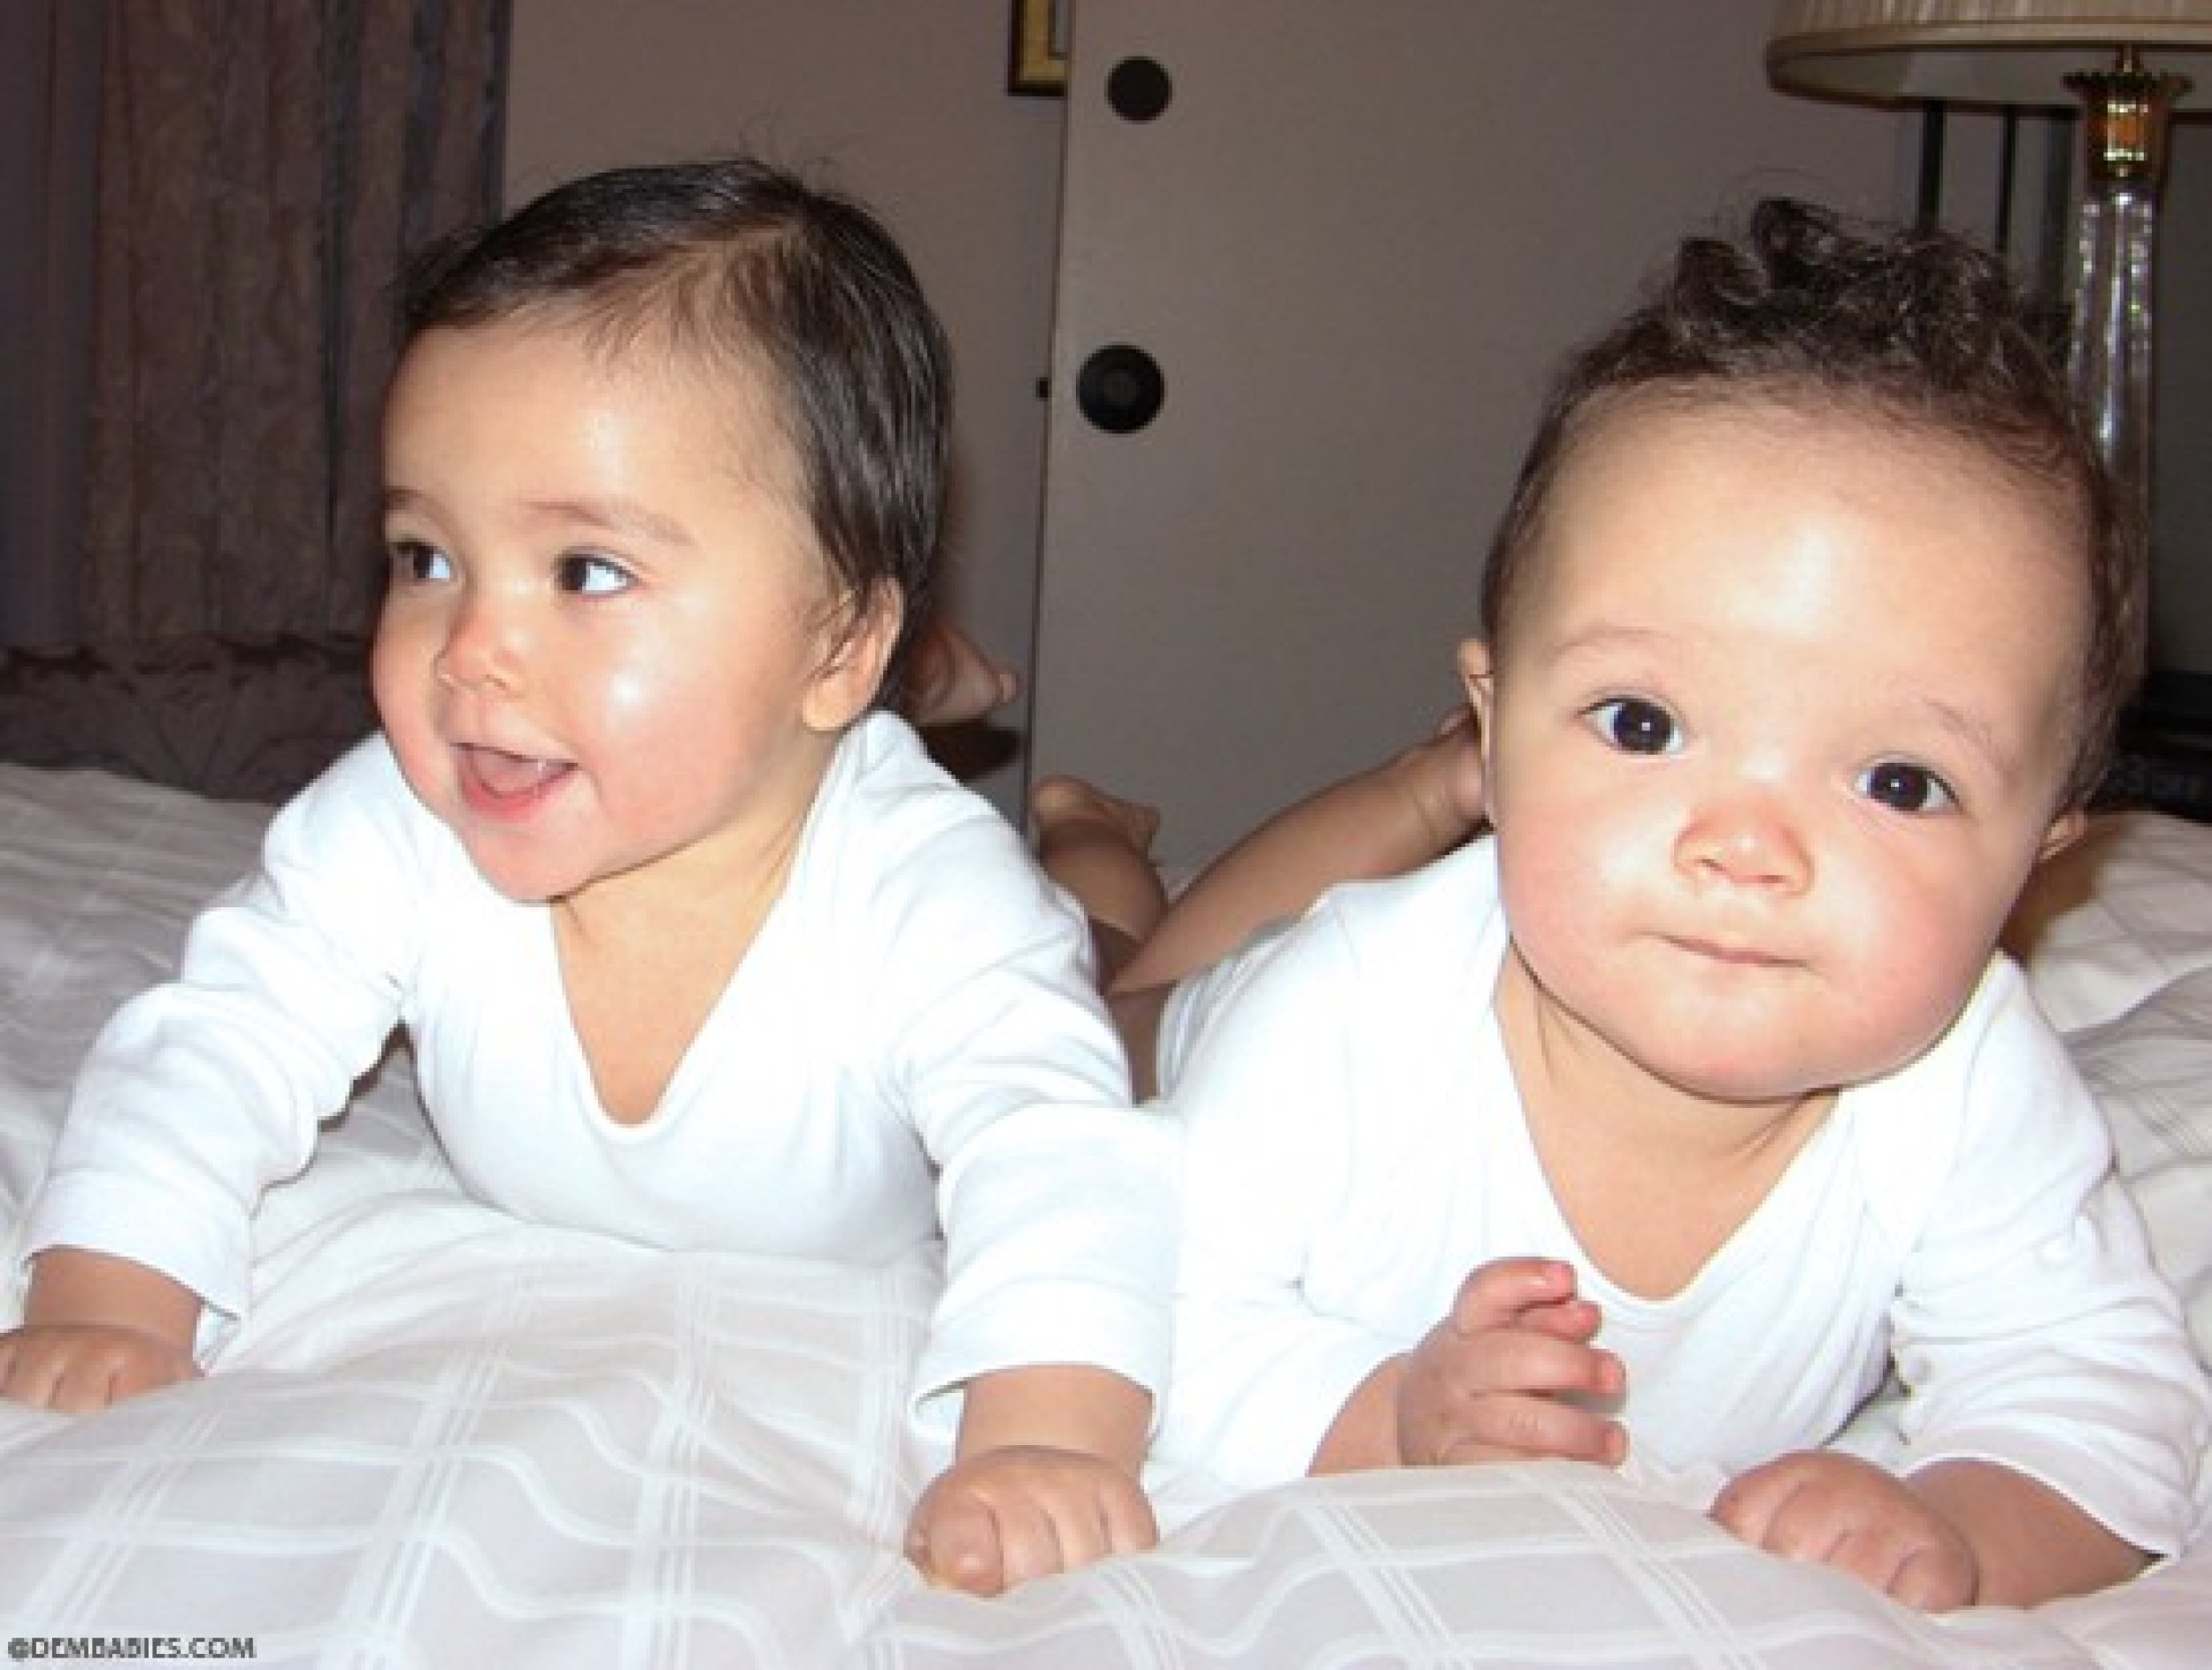 Mariah Carey and Nick Cannons baby twins.